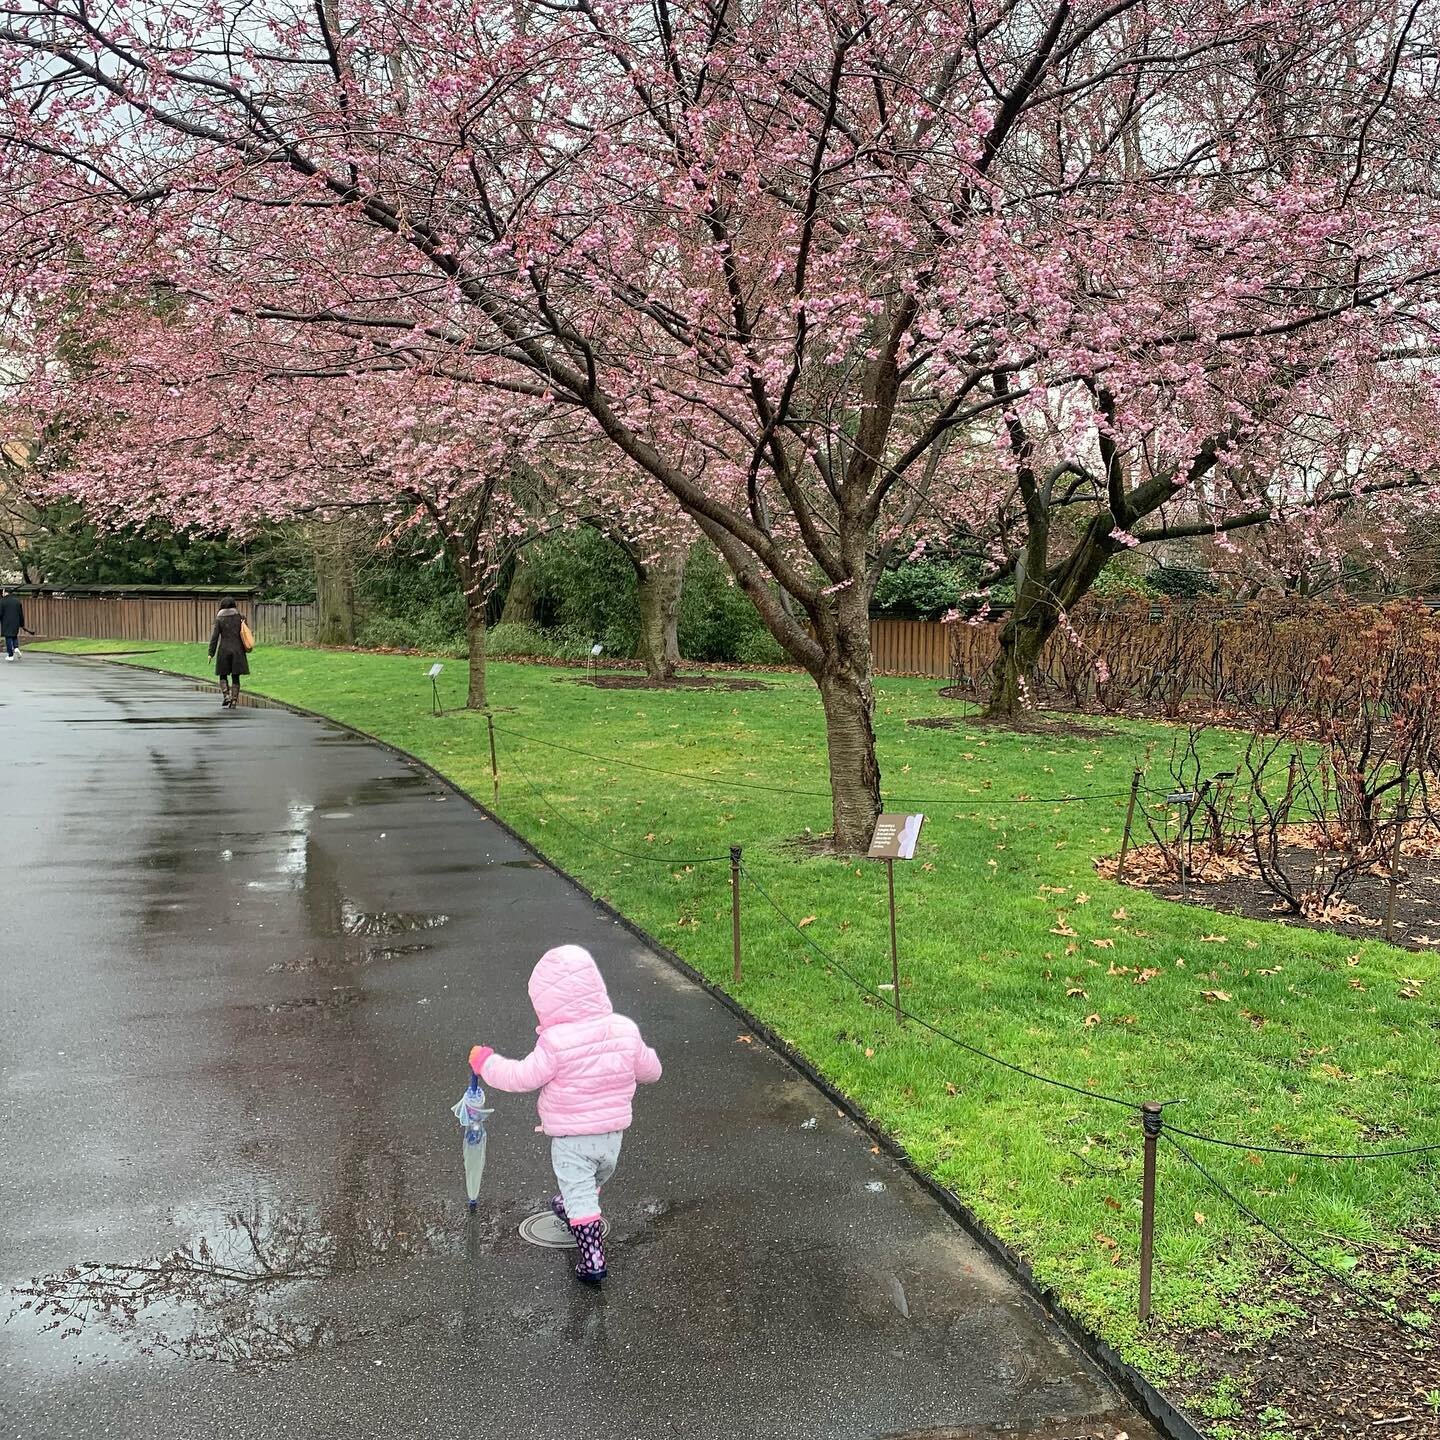 Here come the #cherryblossoms !
@brooklynbotanic